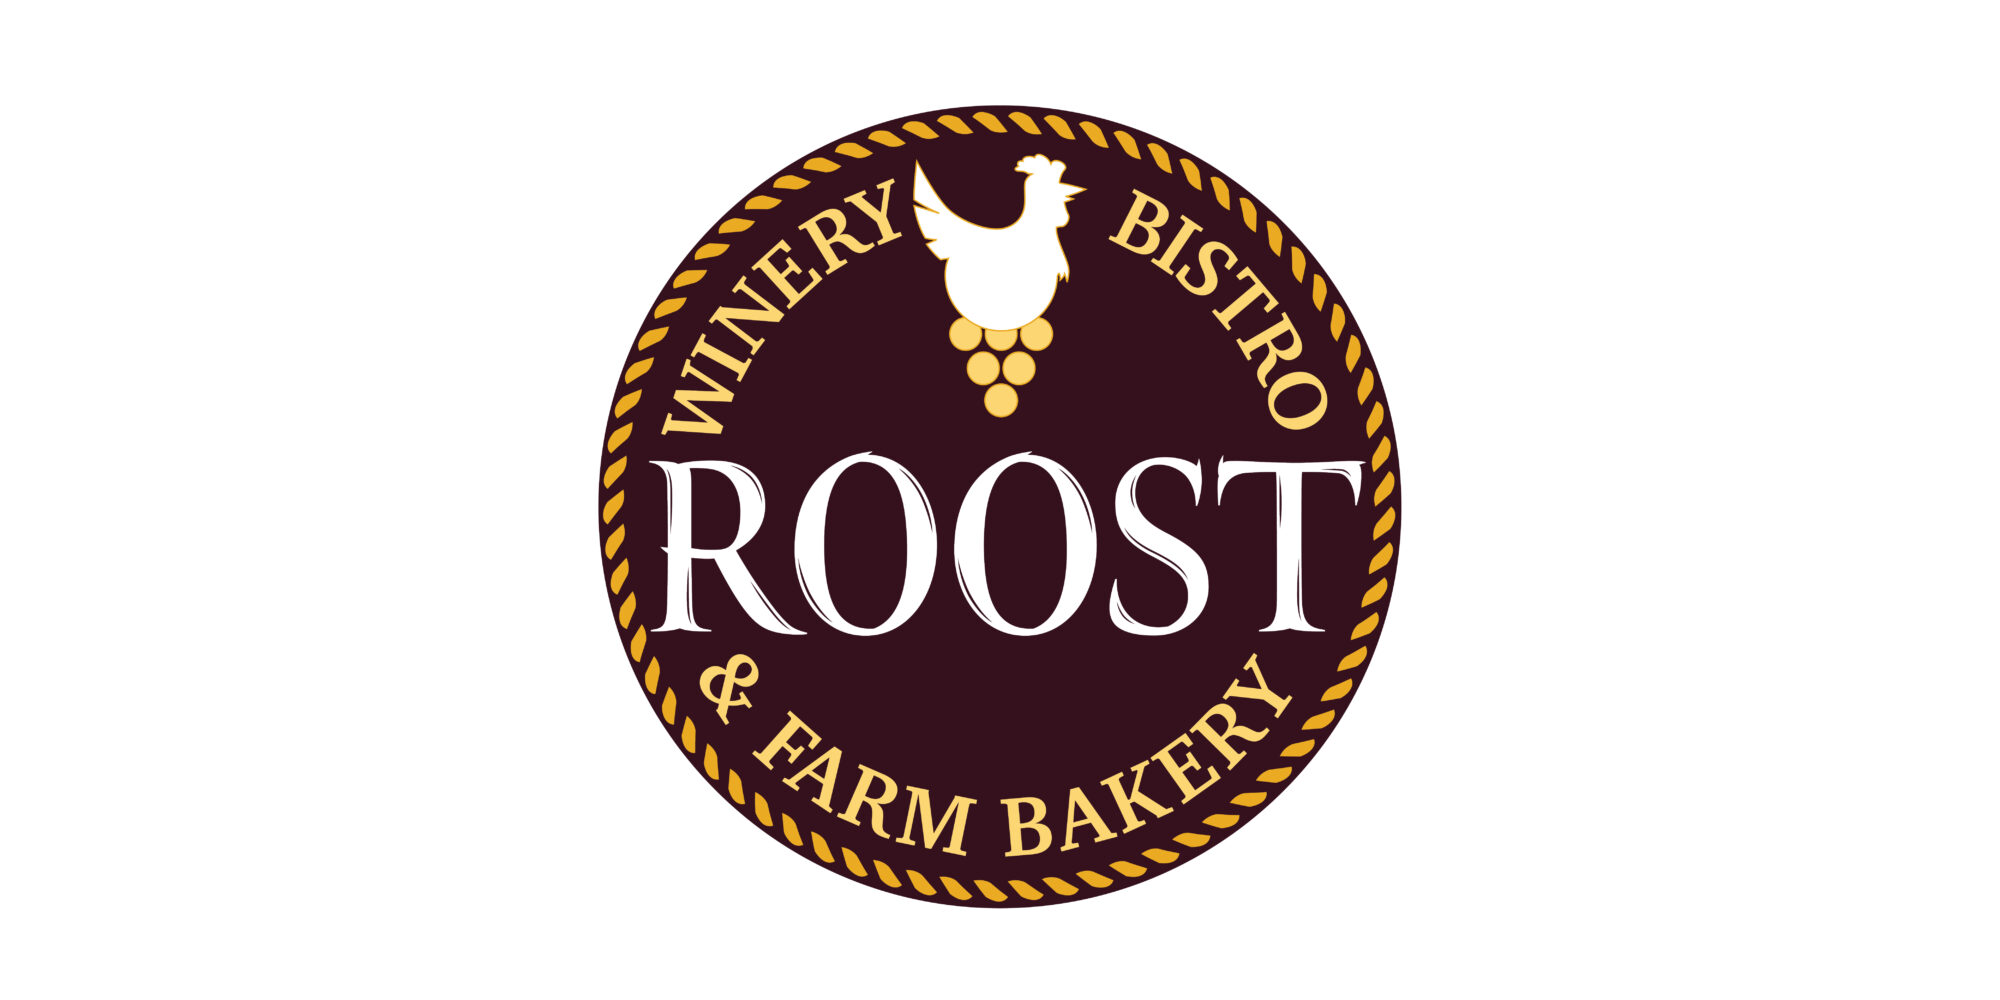 The Roost Winery Bistro & Farm Bakery - Logo